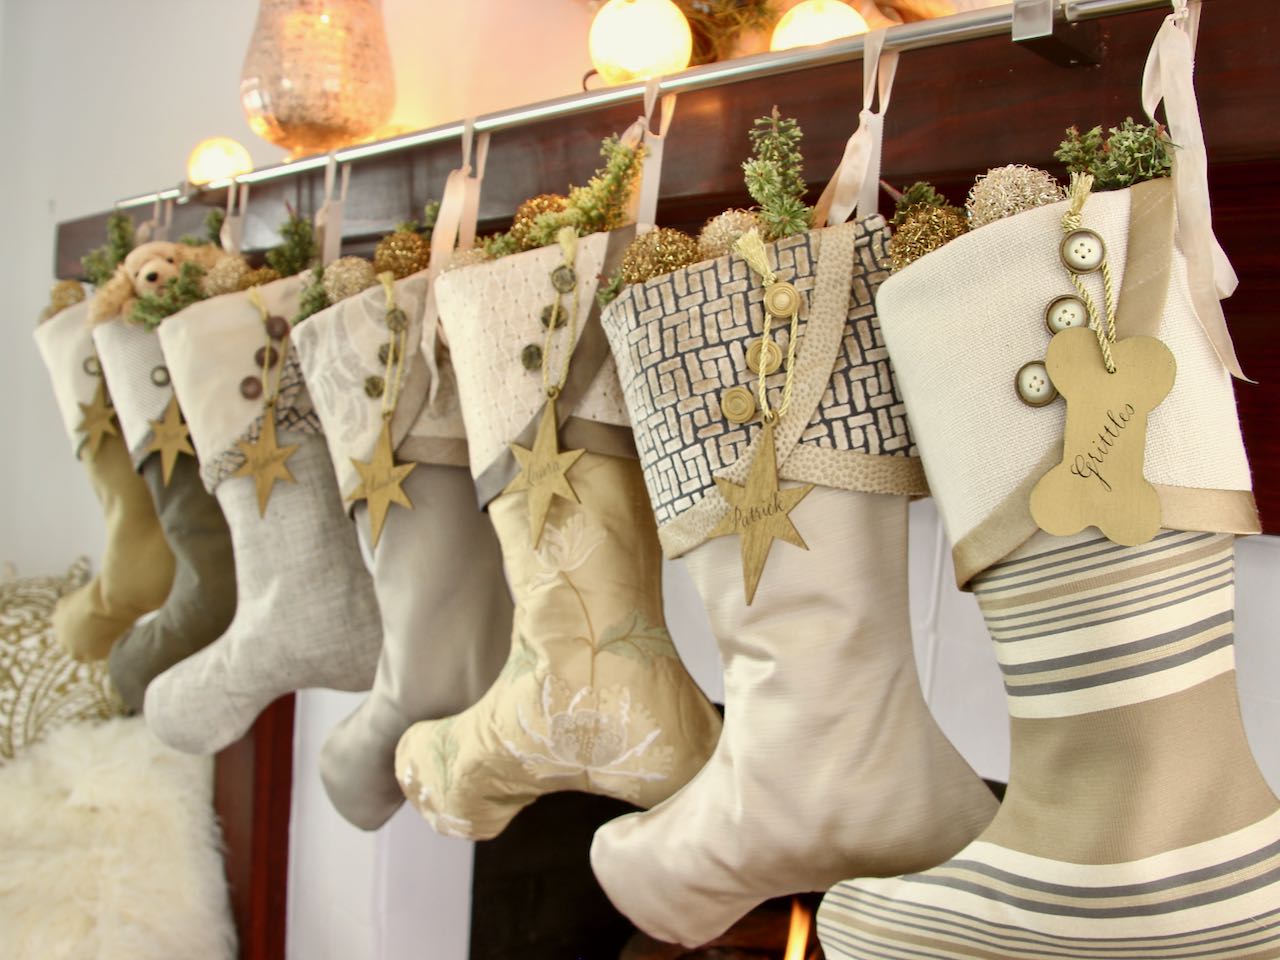 7 coordinating yet unique Christmas stockings are hagning from a mantel above a fire. Gold wood star name tags hang from the top of three buttons on each cuff